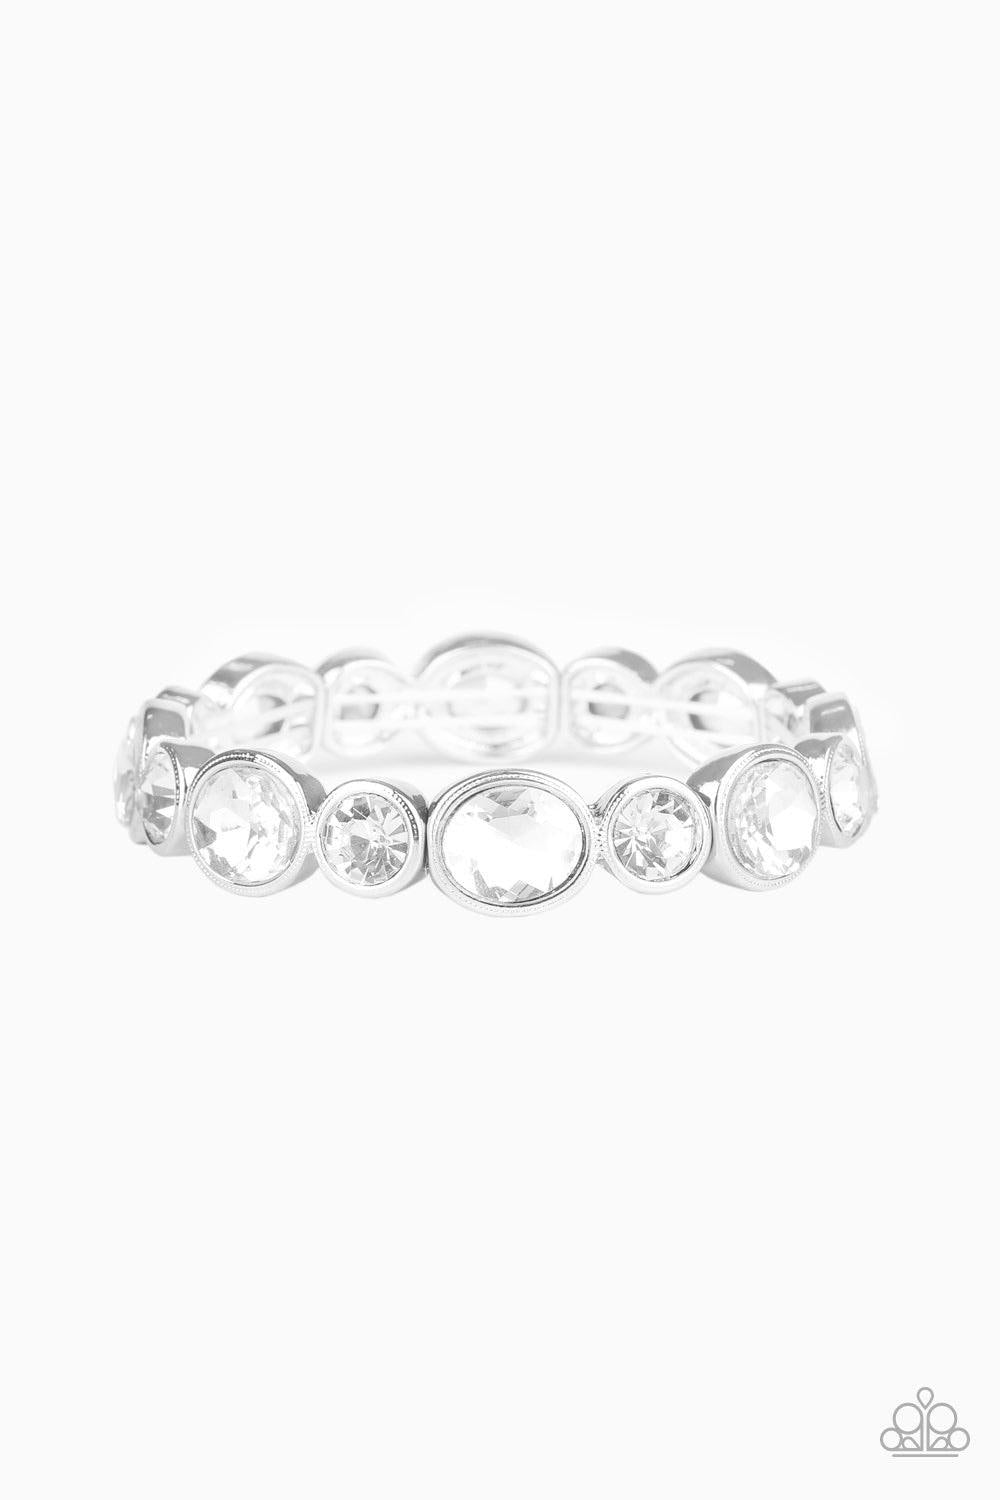 Paparazzi Accessories Still GLOWING Strong - White Encased in sleek silver frames, oval and round white rhinestones alternate along a stretchy band around the wrist for a timeless look. Sold as one individual bracelet. Jewelry